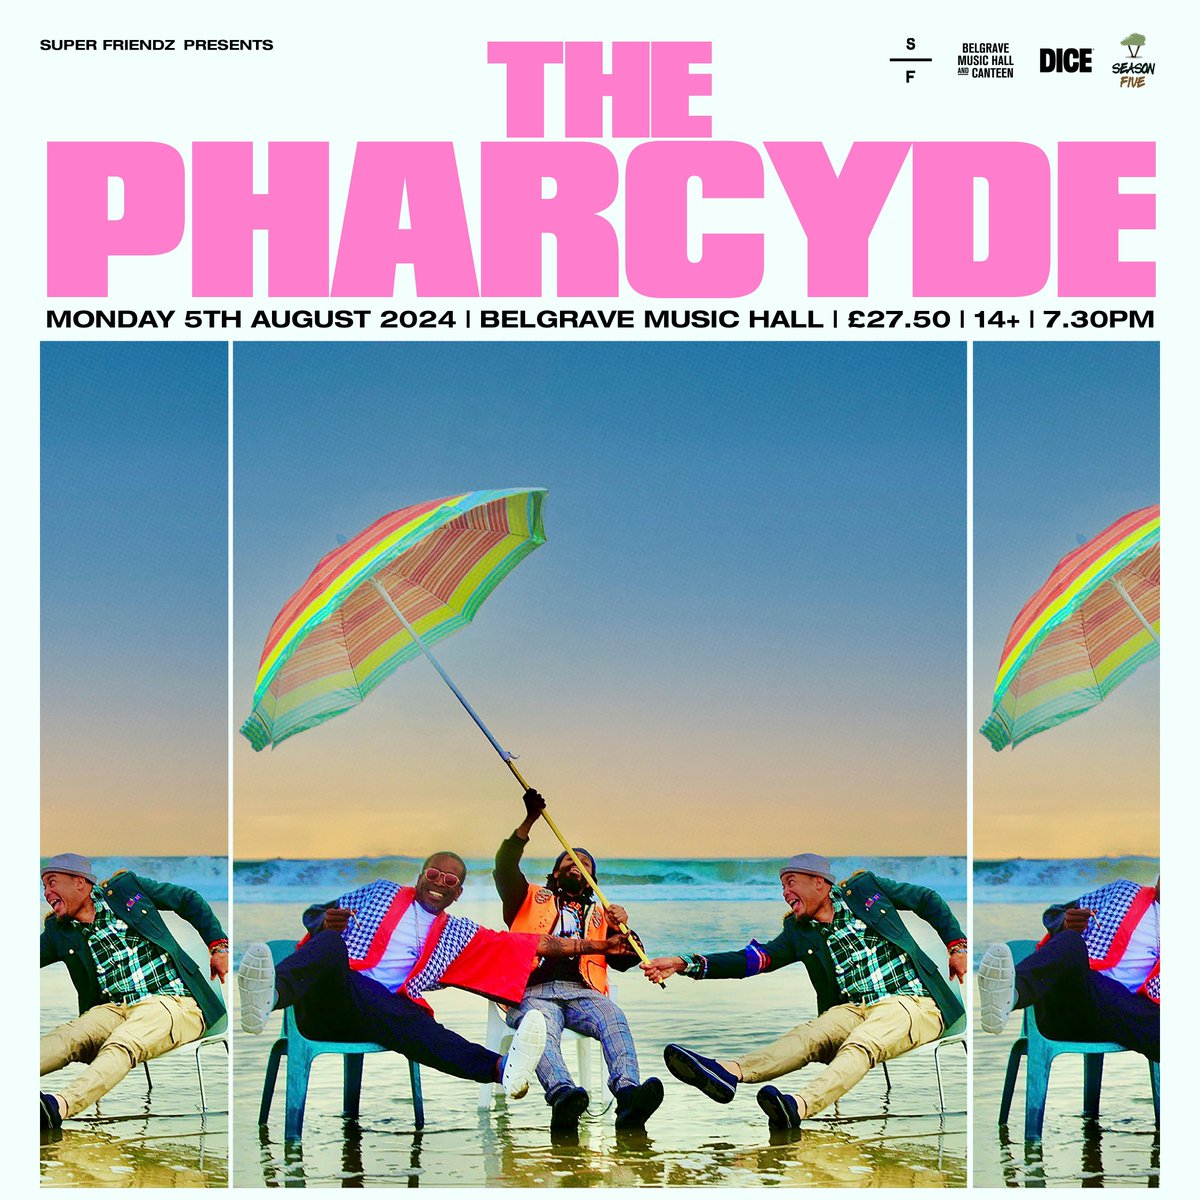 Just announced! Legendary hip hop group, @thepharcyde come to Belgrave, August 5th 🔥 Tickets on sale now! Hit the link to set a reminder 🔔 buff.ly/3JreDsx